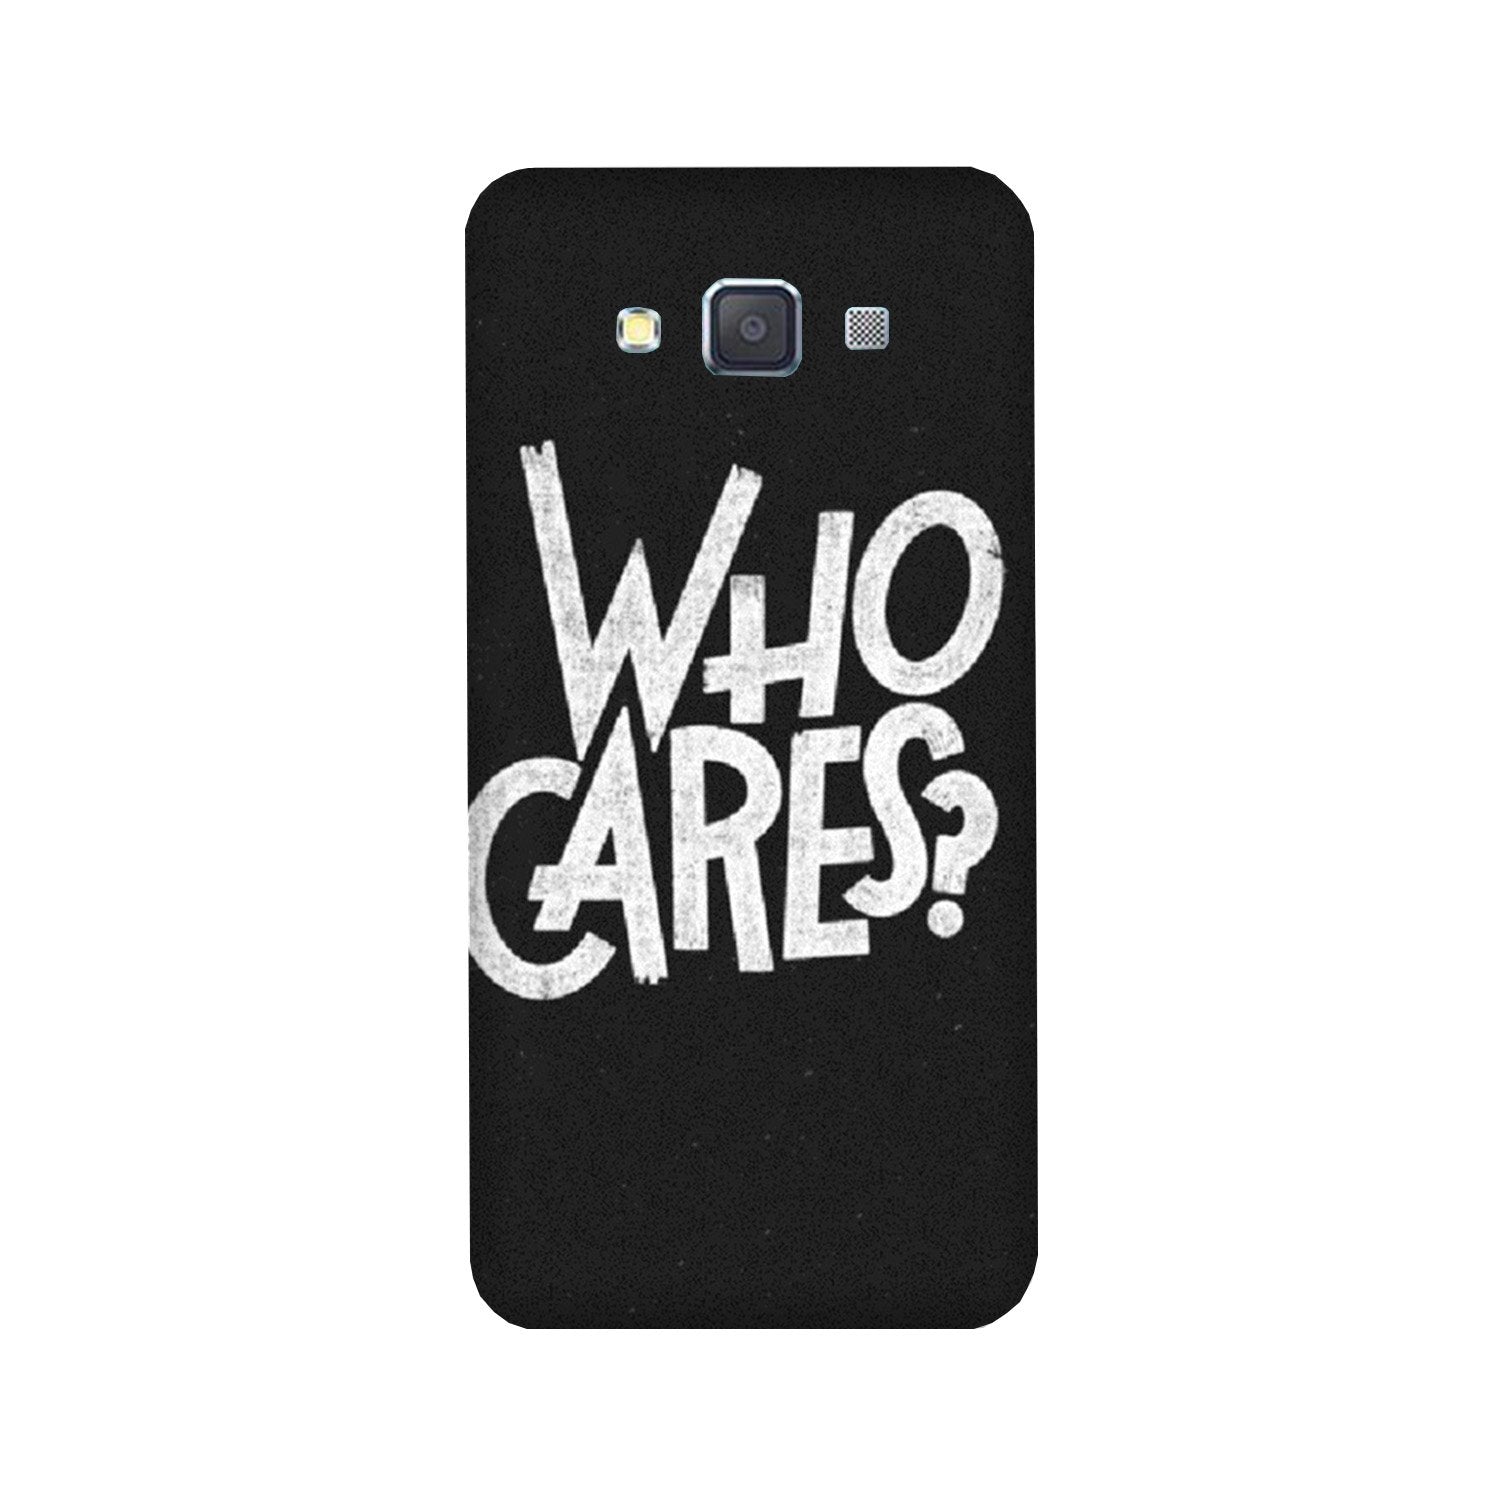 Who Cares Case for Galaxy ON7/ON7 Pro